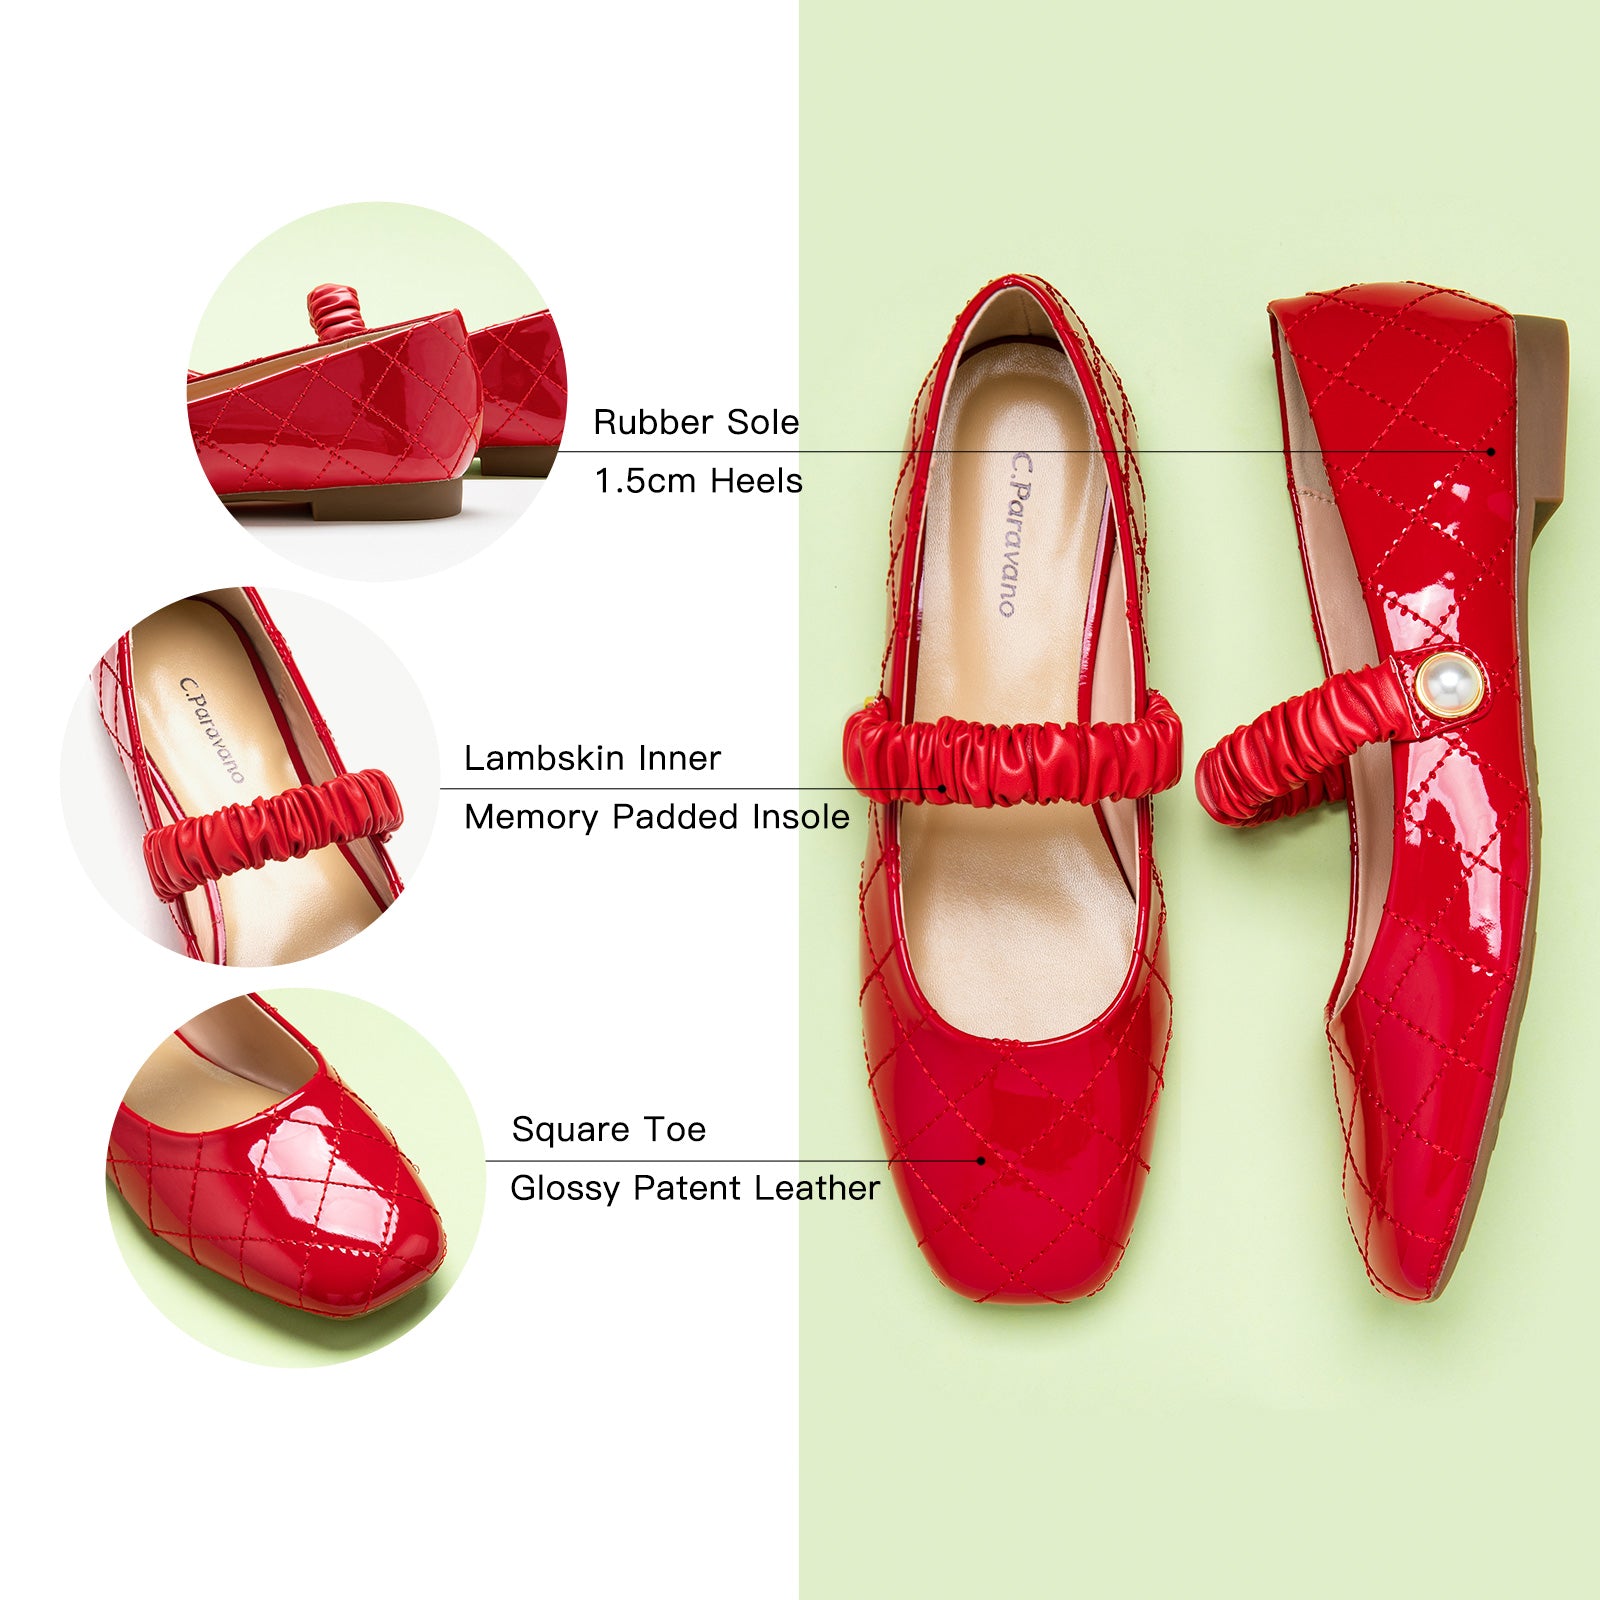 Patent Crossed Stripe Mary Jane shoes in Red, combining timeless elegance with a modern twist